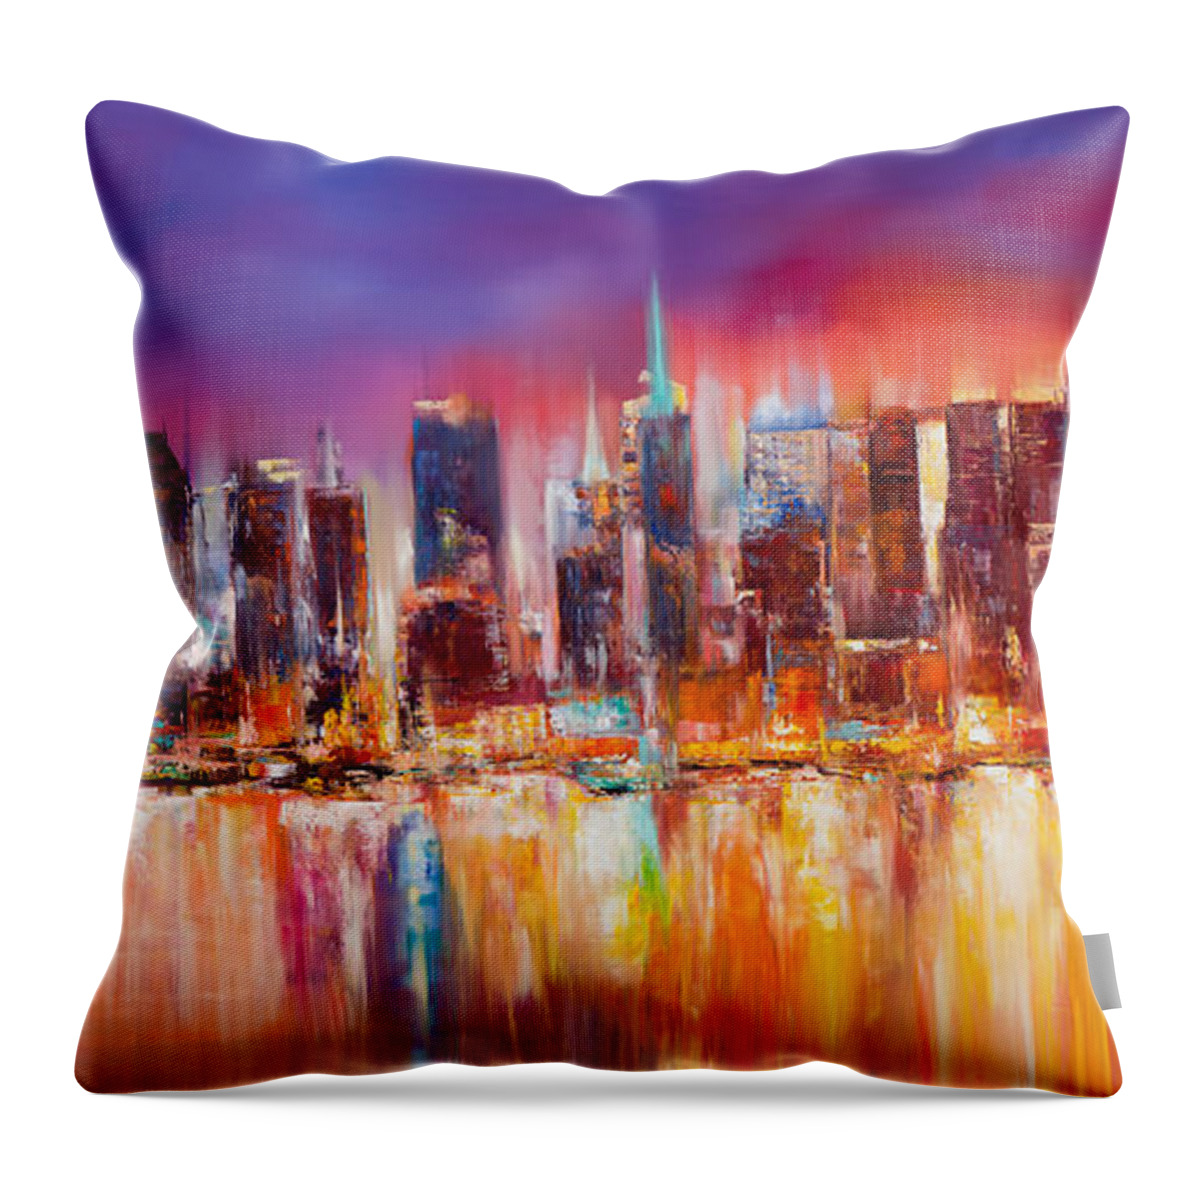 Nyc Paintings Throw Pillow featuring the painting Vibrant New York City Skyline by Manit